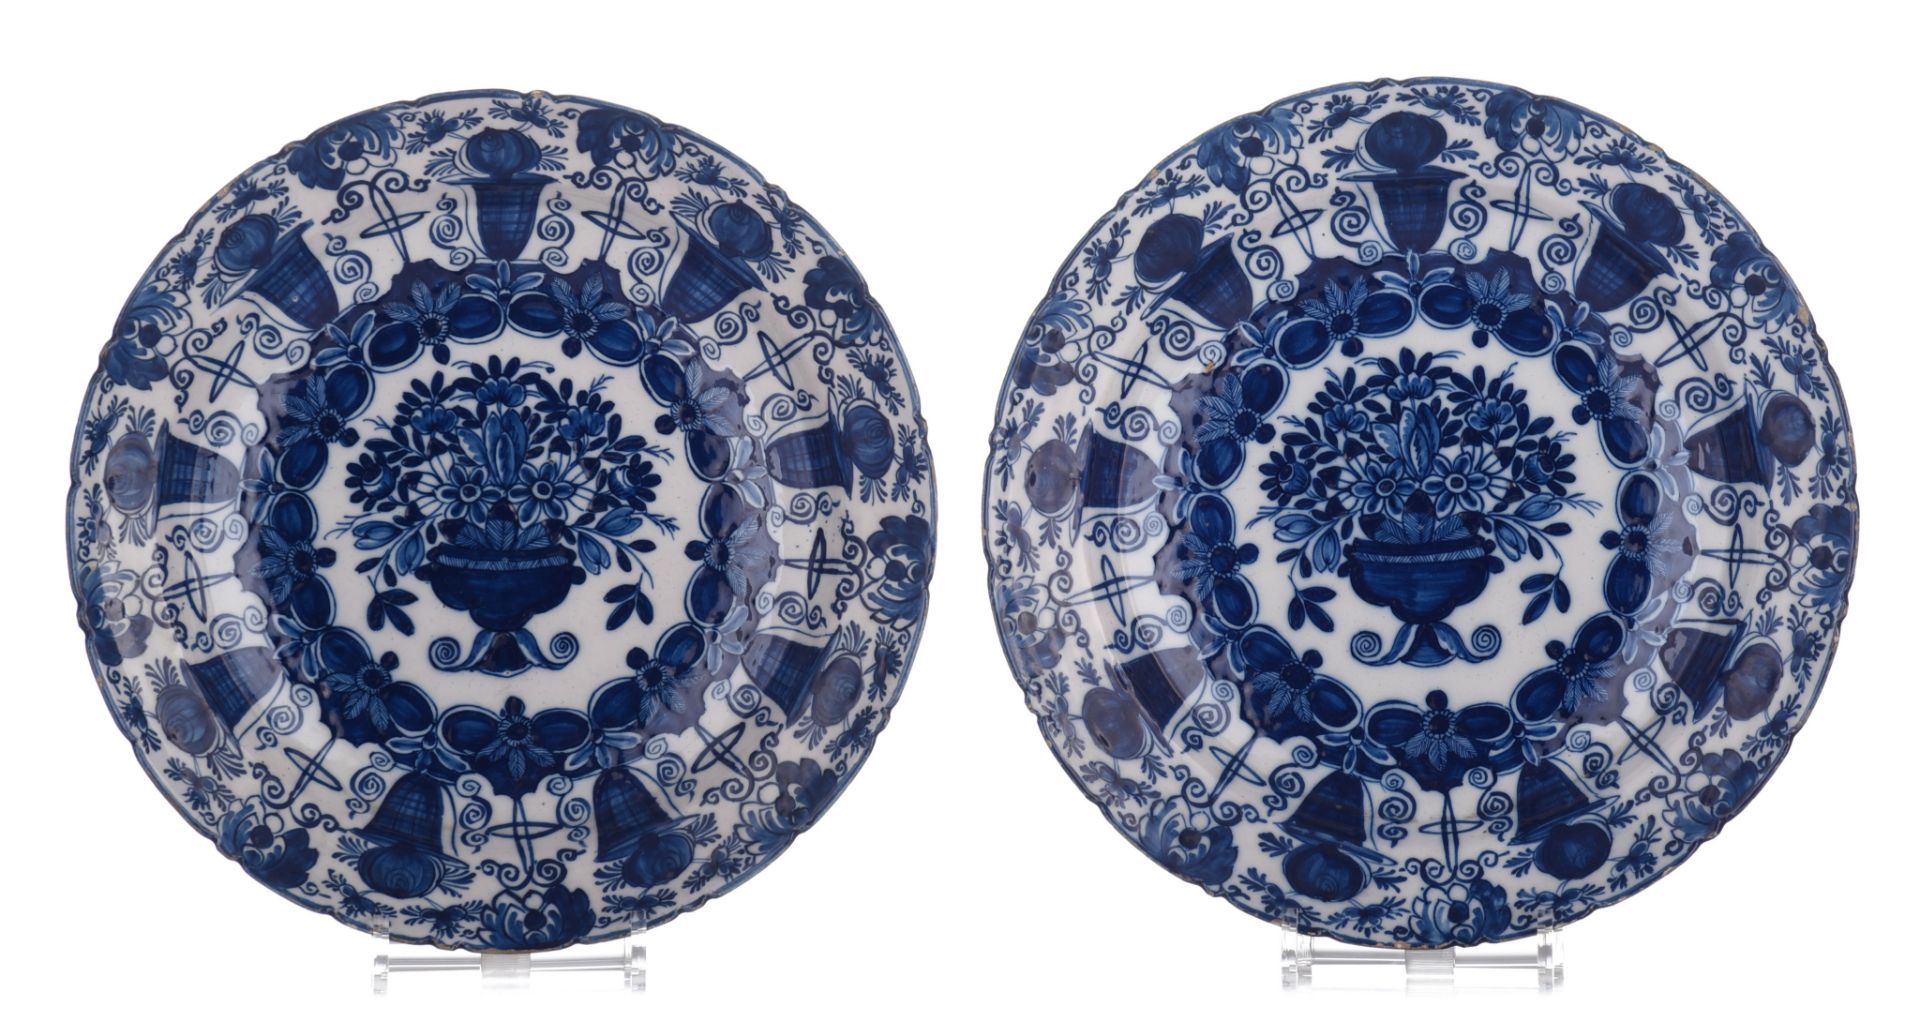 A collection of six Delft blue and white flower basket chargers, marked 'De Klauw', 18thC, ¯ 35 cm - Image 4 of 10